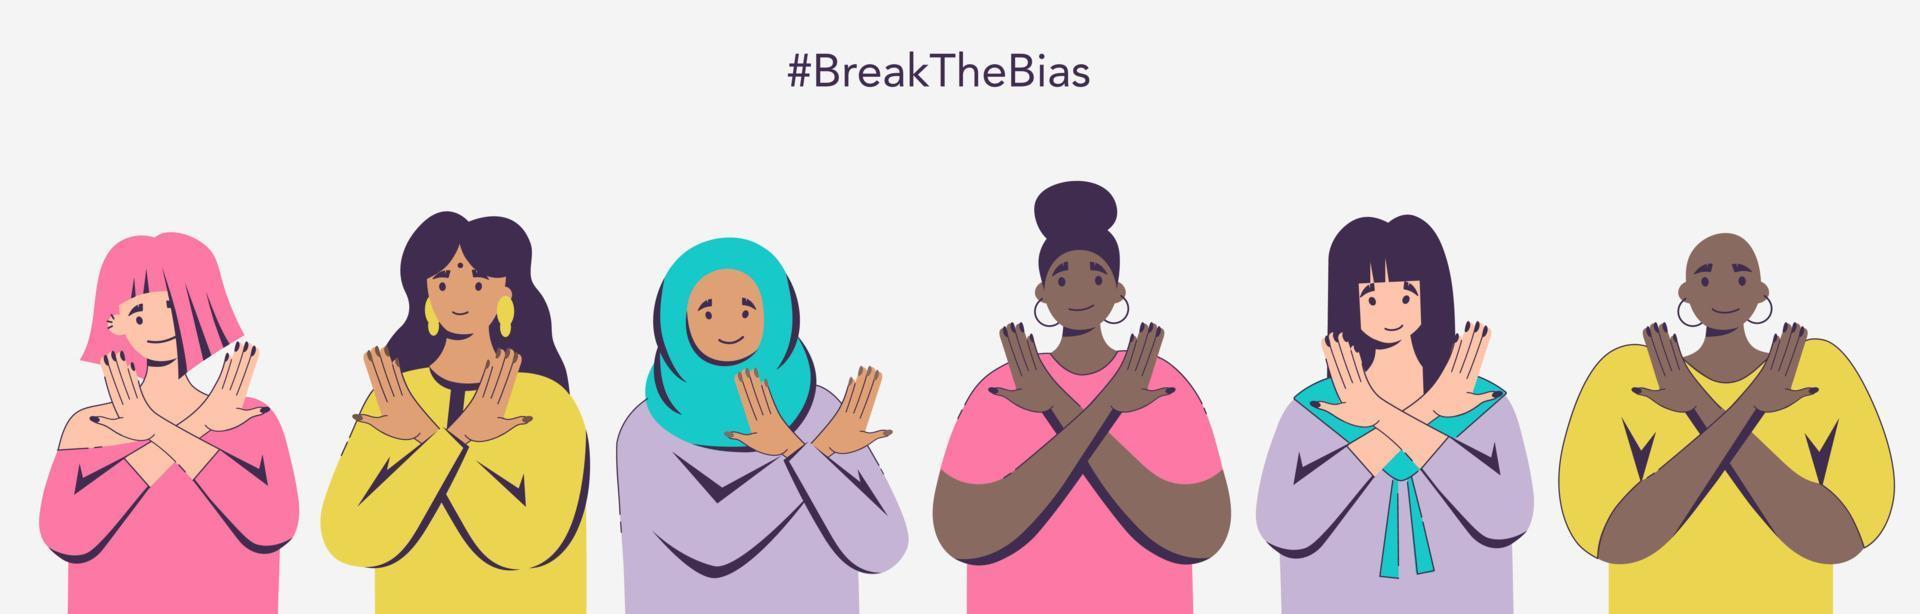 Movement against discrimination inequality, stereotypes. Group of women of different ethnic group muslim, Indian, African, informal. Break the bias. Allyship woman feminism. International woman day. vector